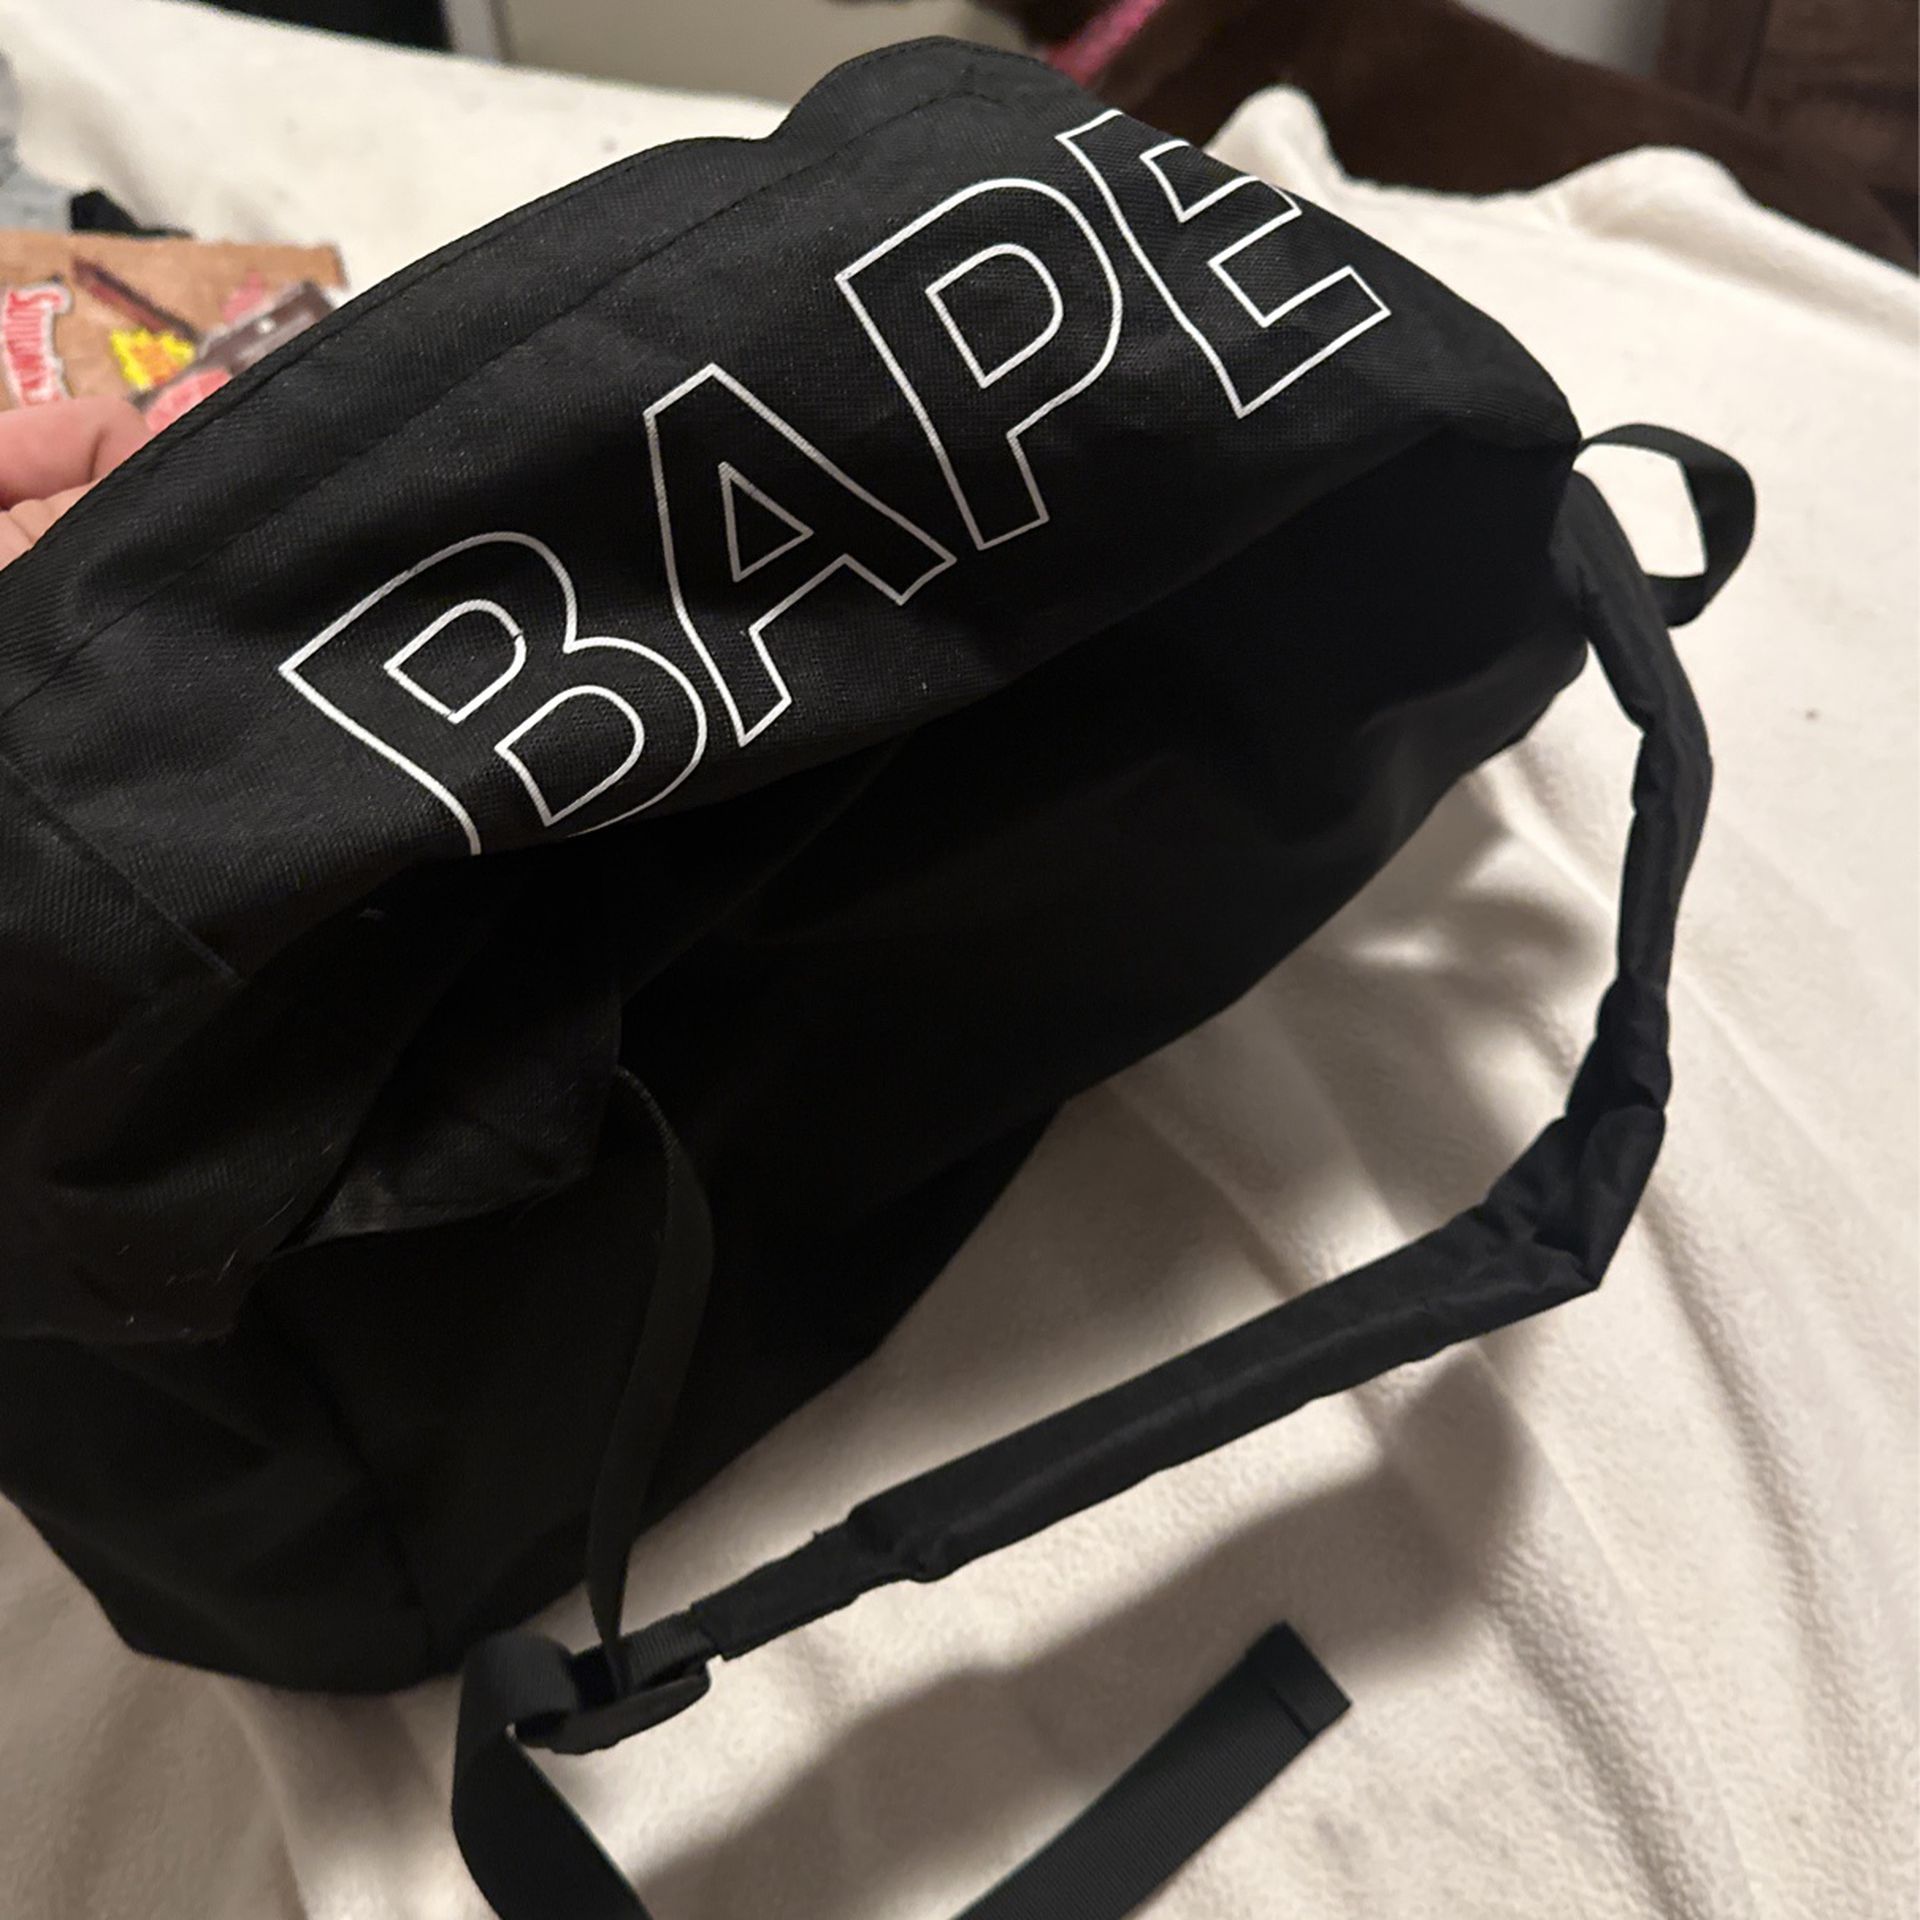 White Bape Backpack for Sale in Ceres, CA - OfferUp